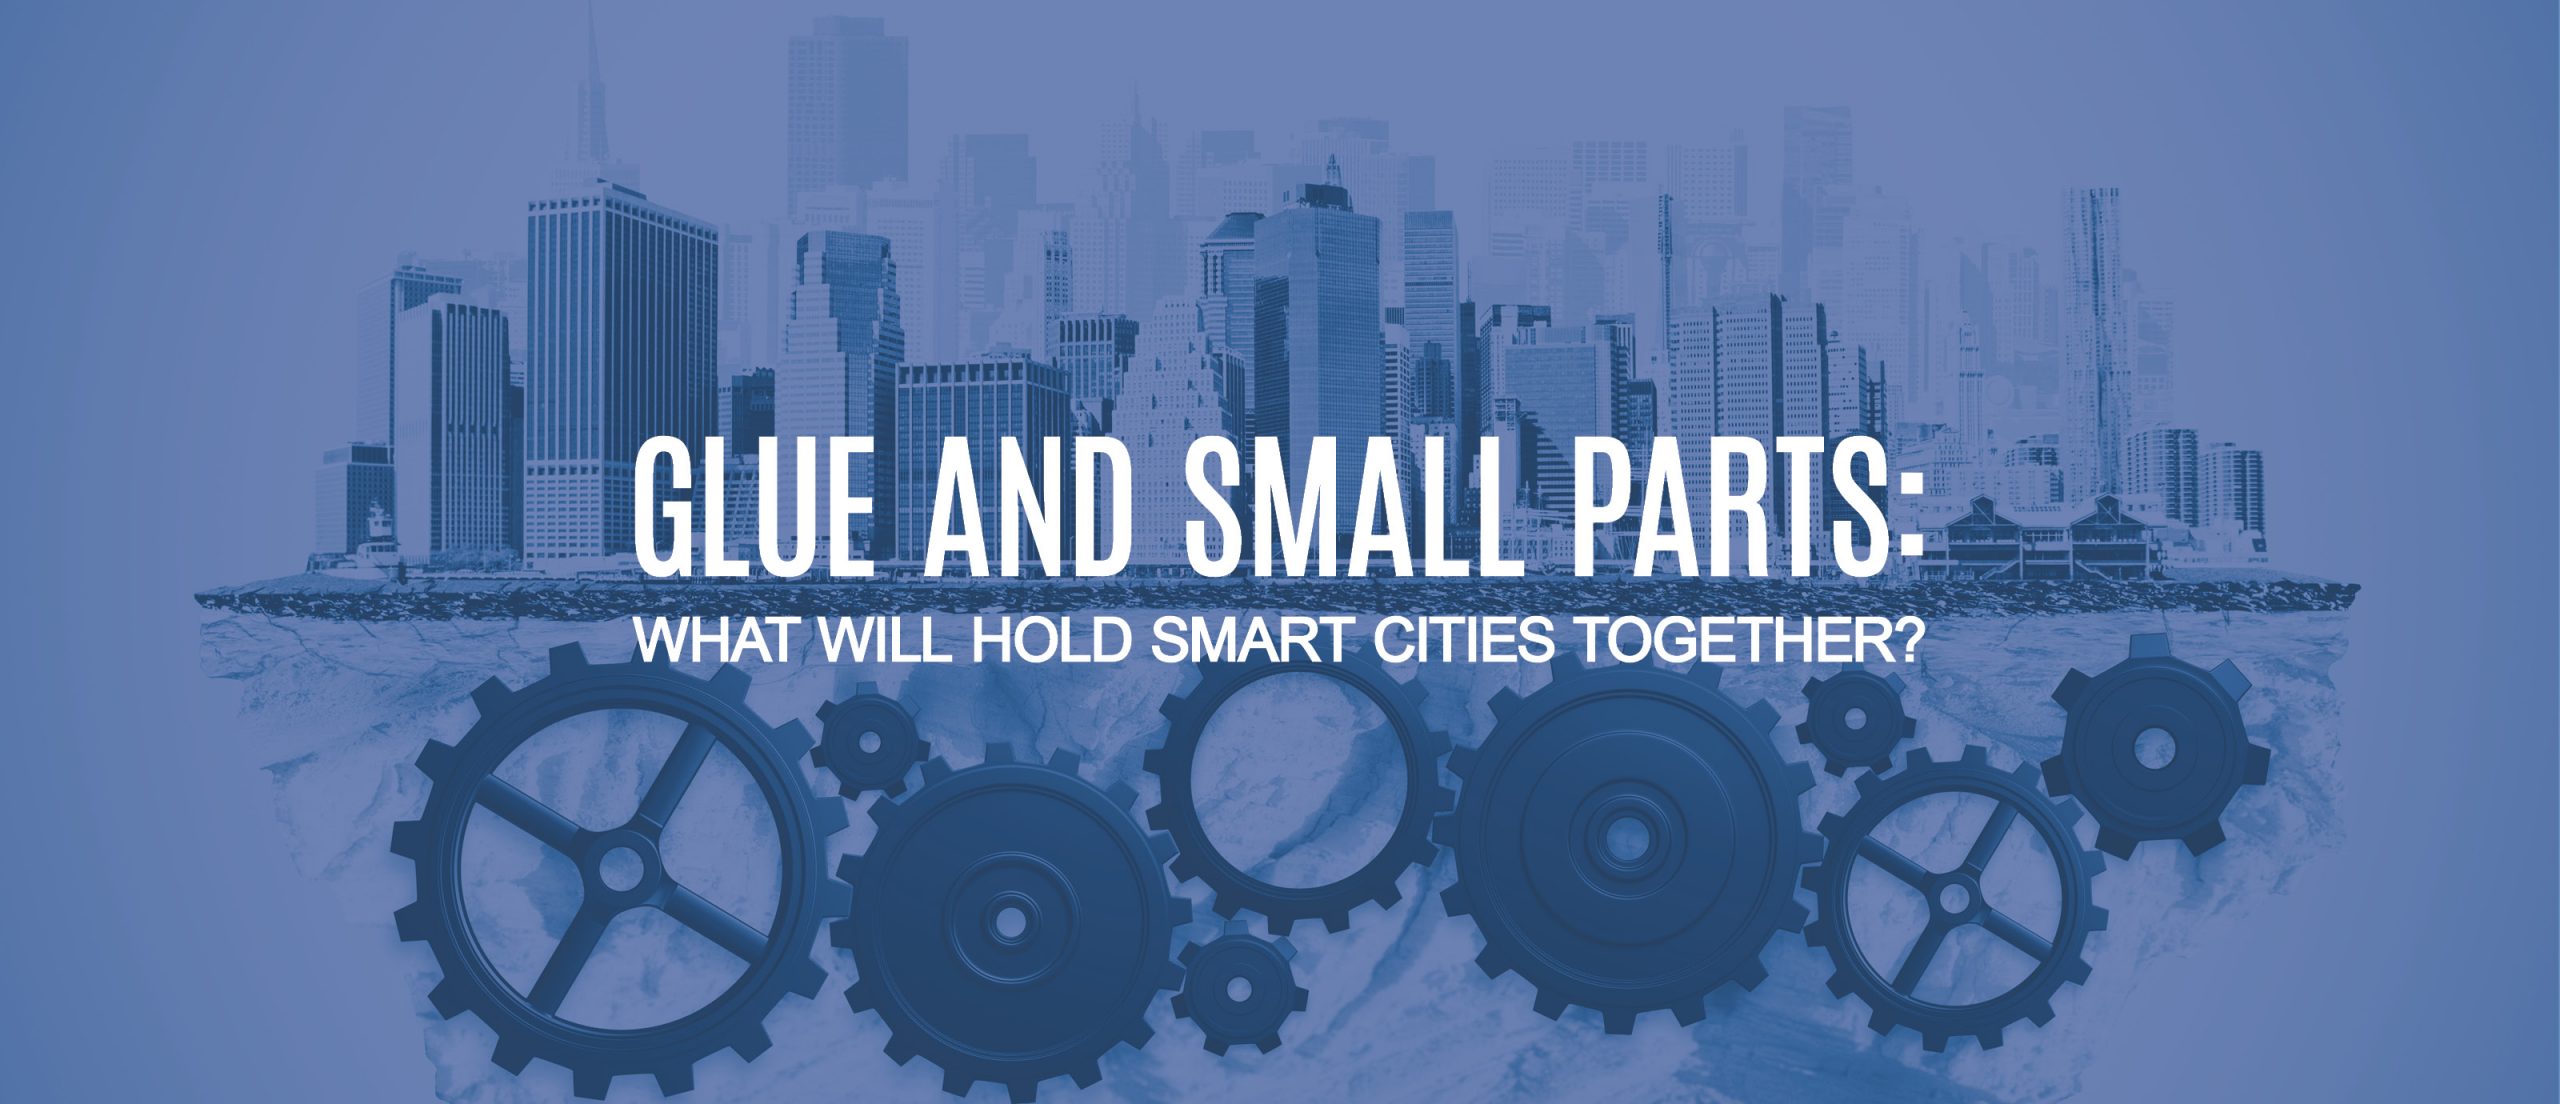 Blog Title - Glue and small parts: what will hold smart cities together?